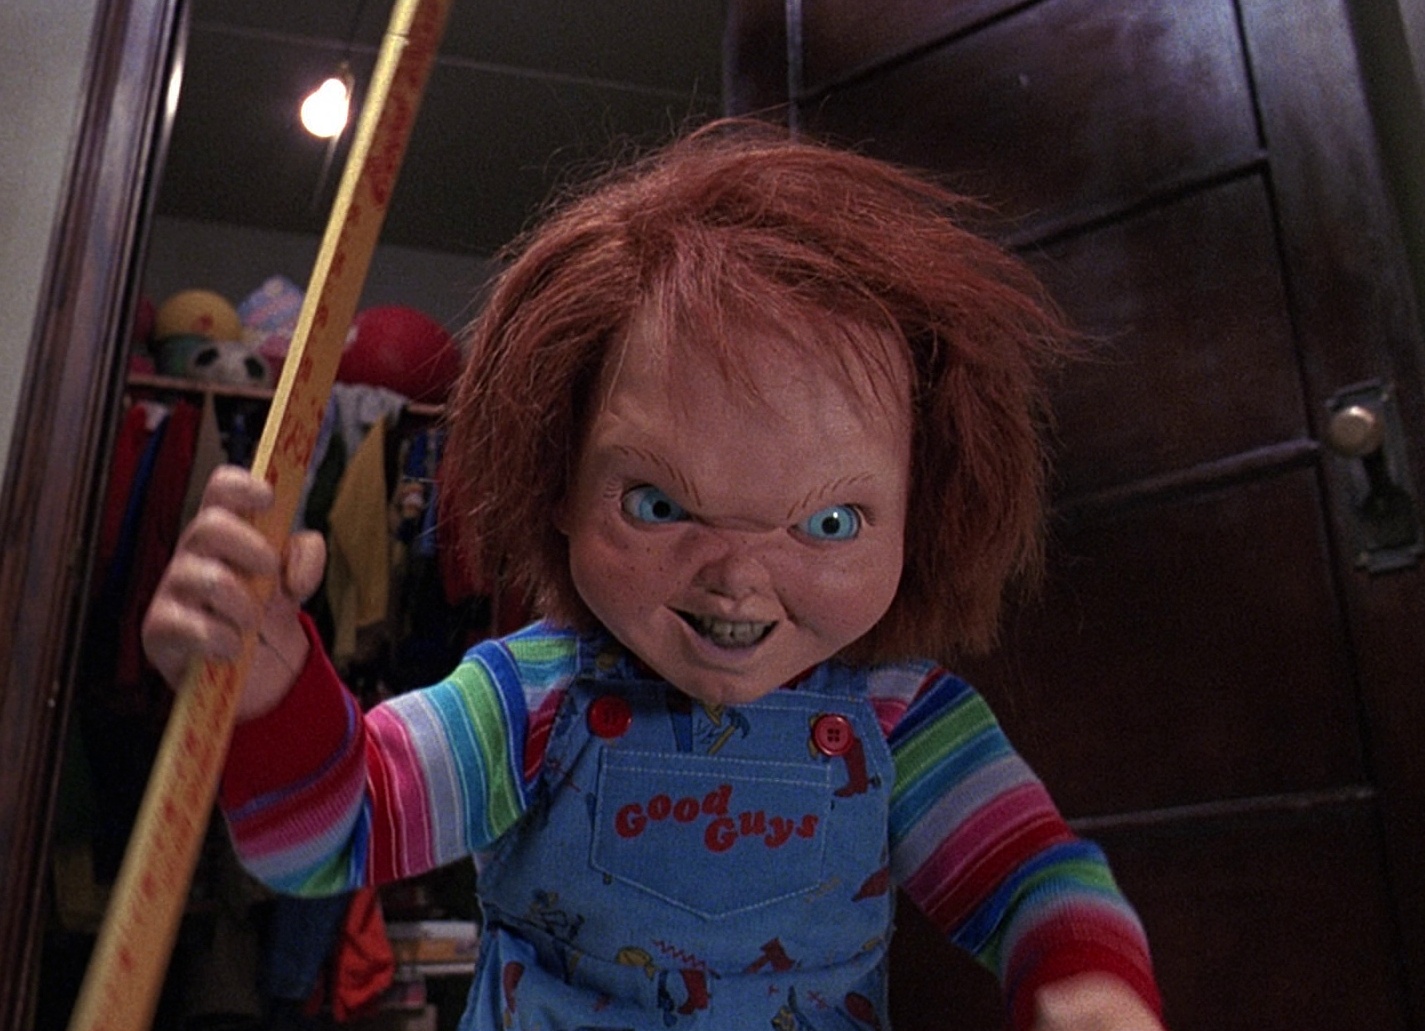 child's play 3 good guy doll